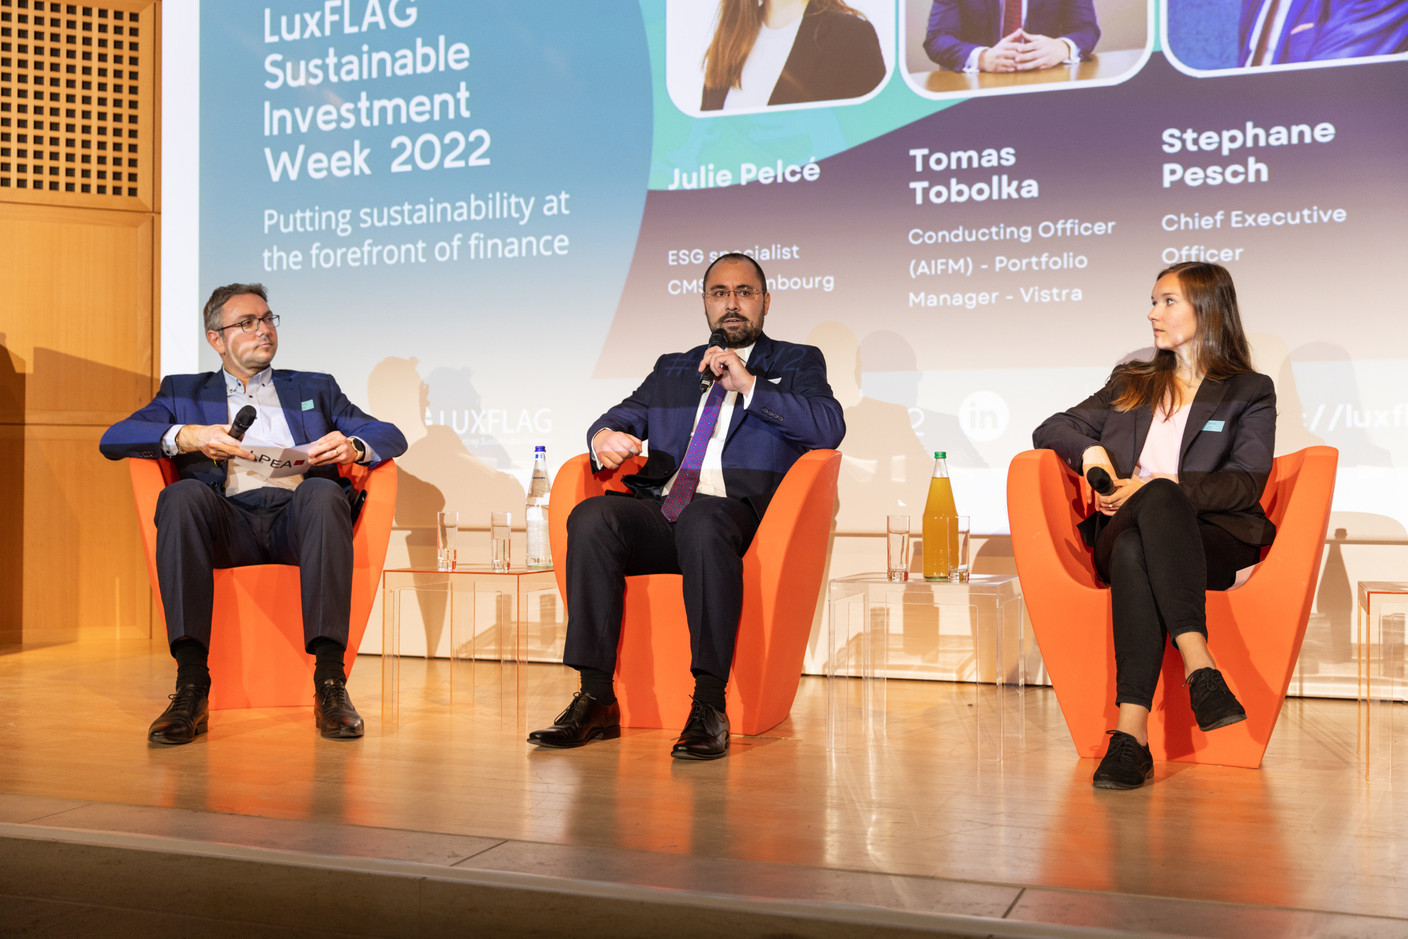 Stephane Pesch of the Luxembourg Private Equity and Venture Capital Association (LPEA), Tomas Tobolka of Vistra Fund Management and Julie Pelcé of CMS are seen during Luxflag Sustainable Investment Week 2022, 19 October 2022. Photo: Romain Gamba/Maison Moderne